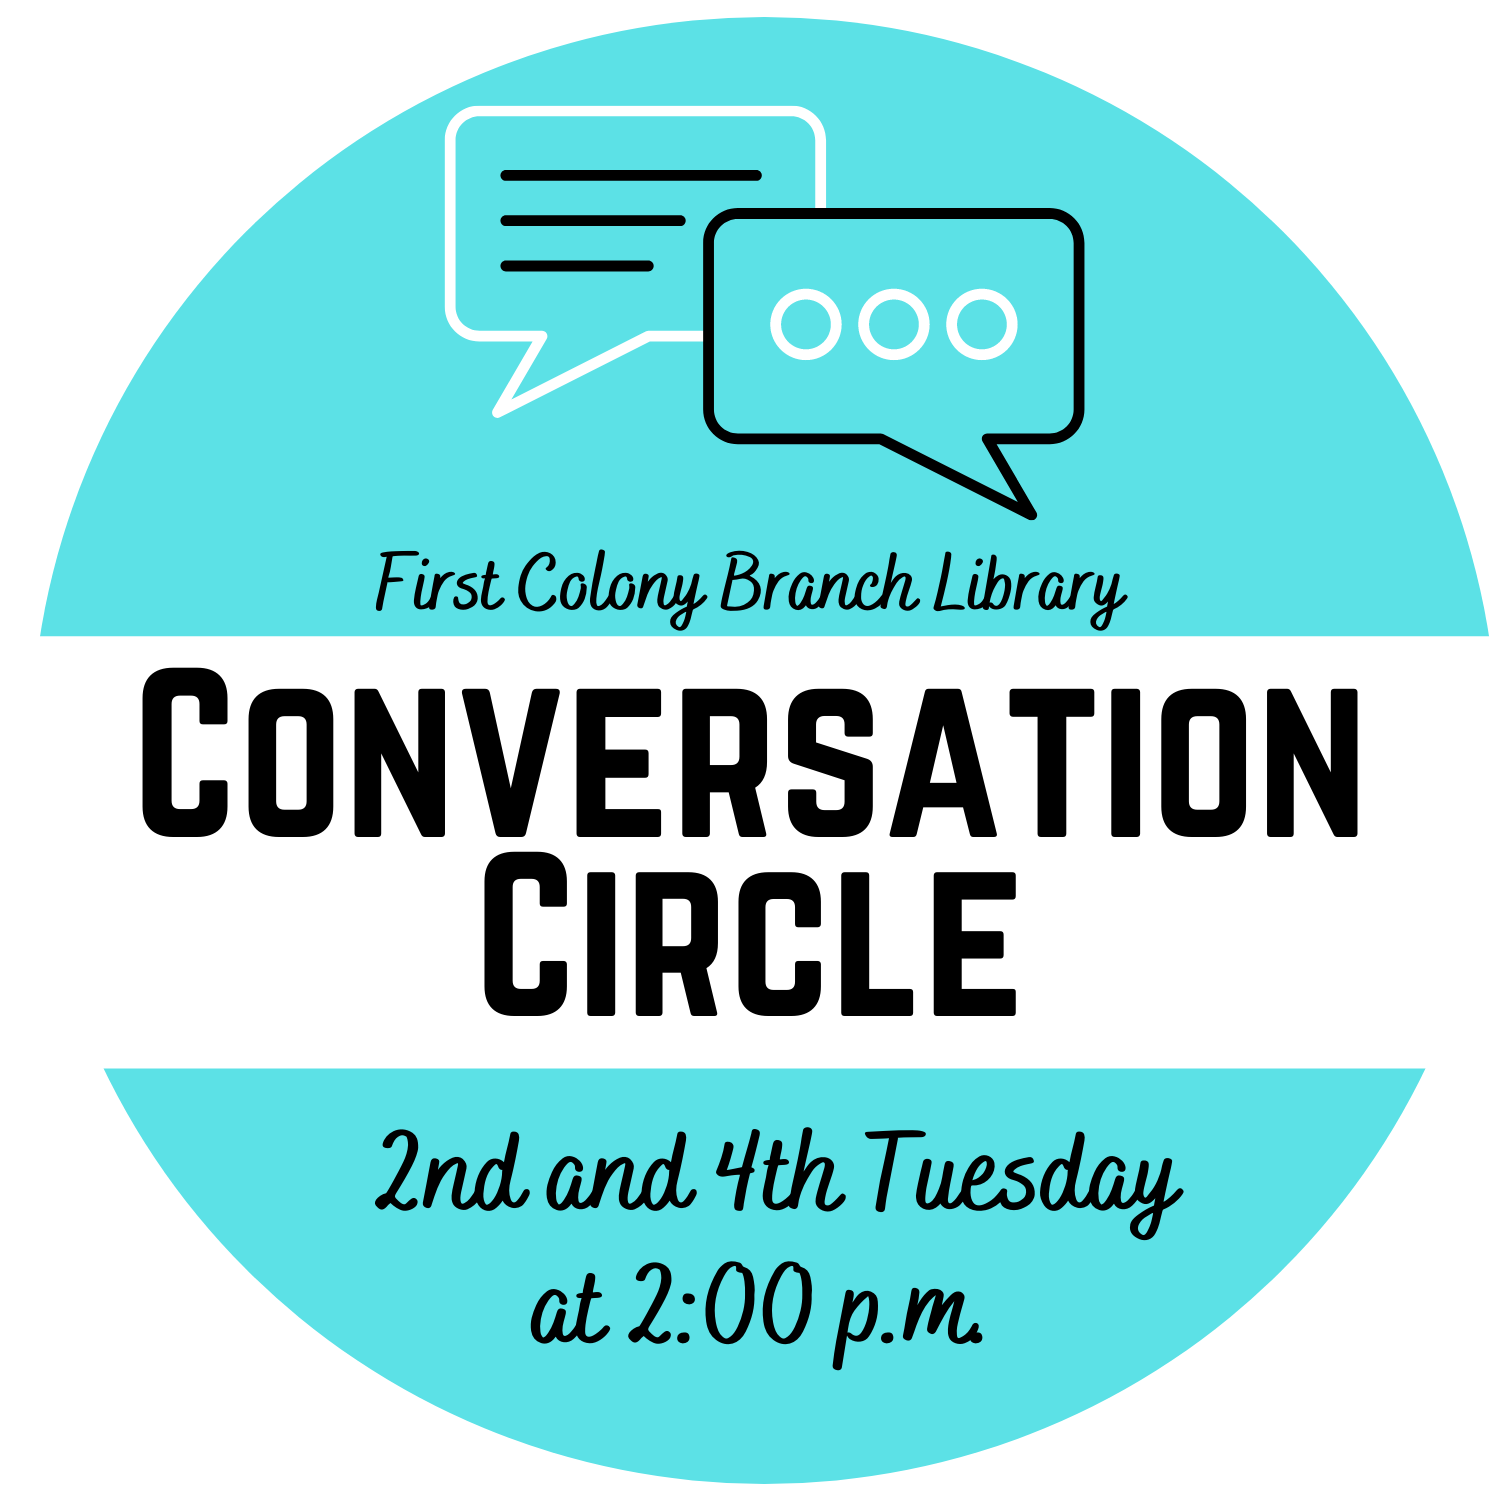 Speech bubbles with text Conversation Circle 2nd and 4th Tuesday at 2pm